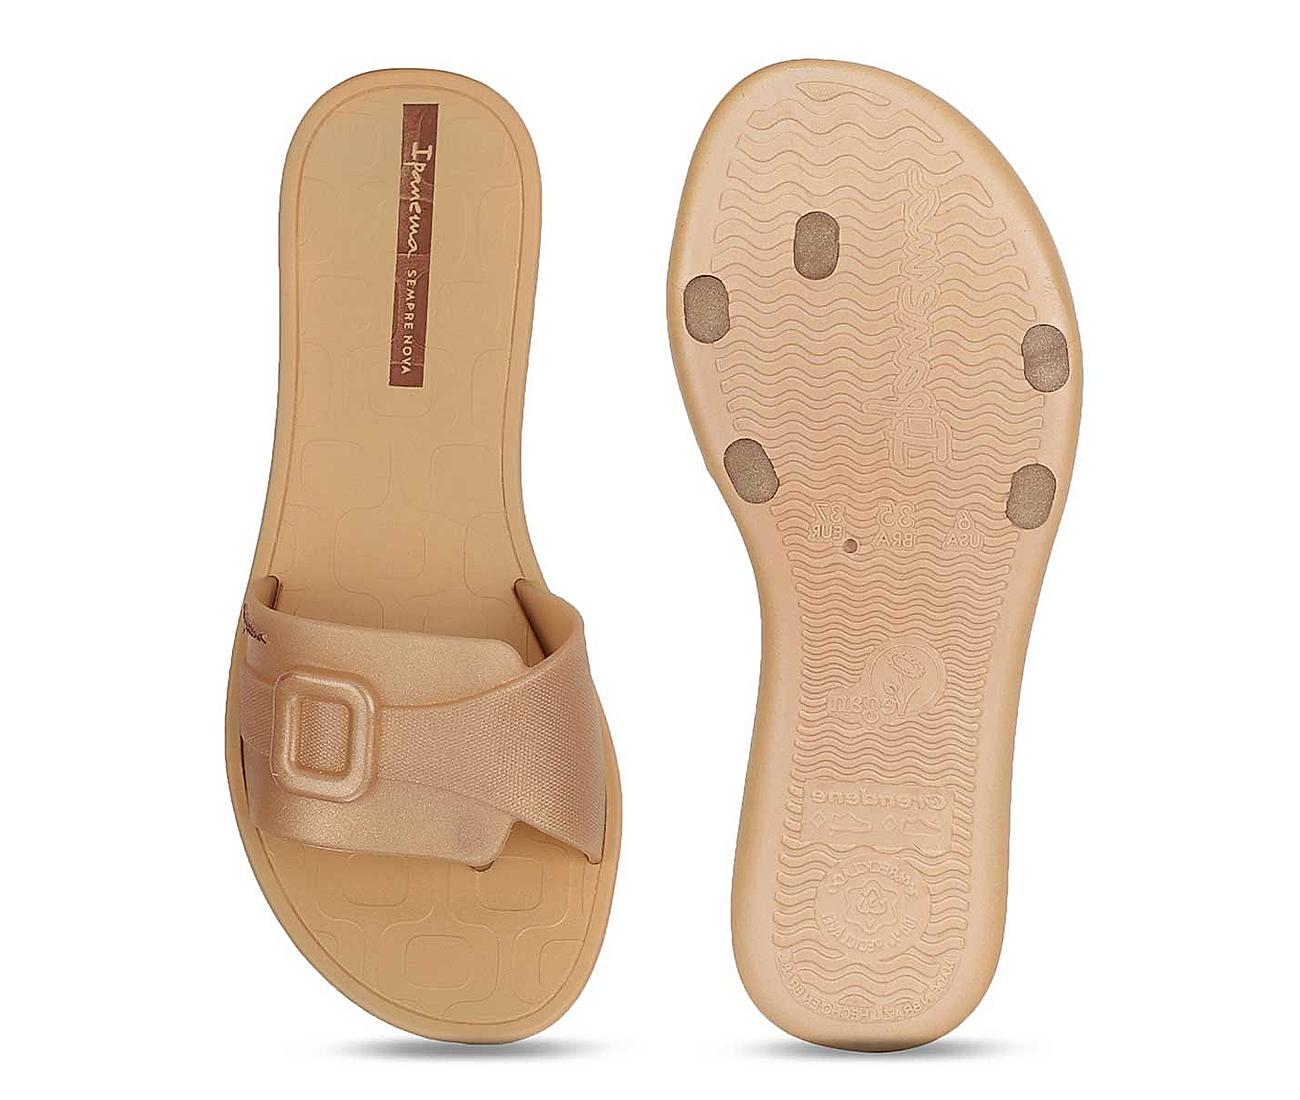 50% Off on Pimento By Malaga Women's Slippers Starts from Rs. 100 | Womens  slippers, Slippers, Women